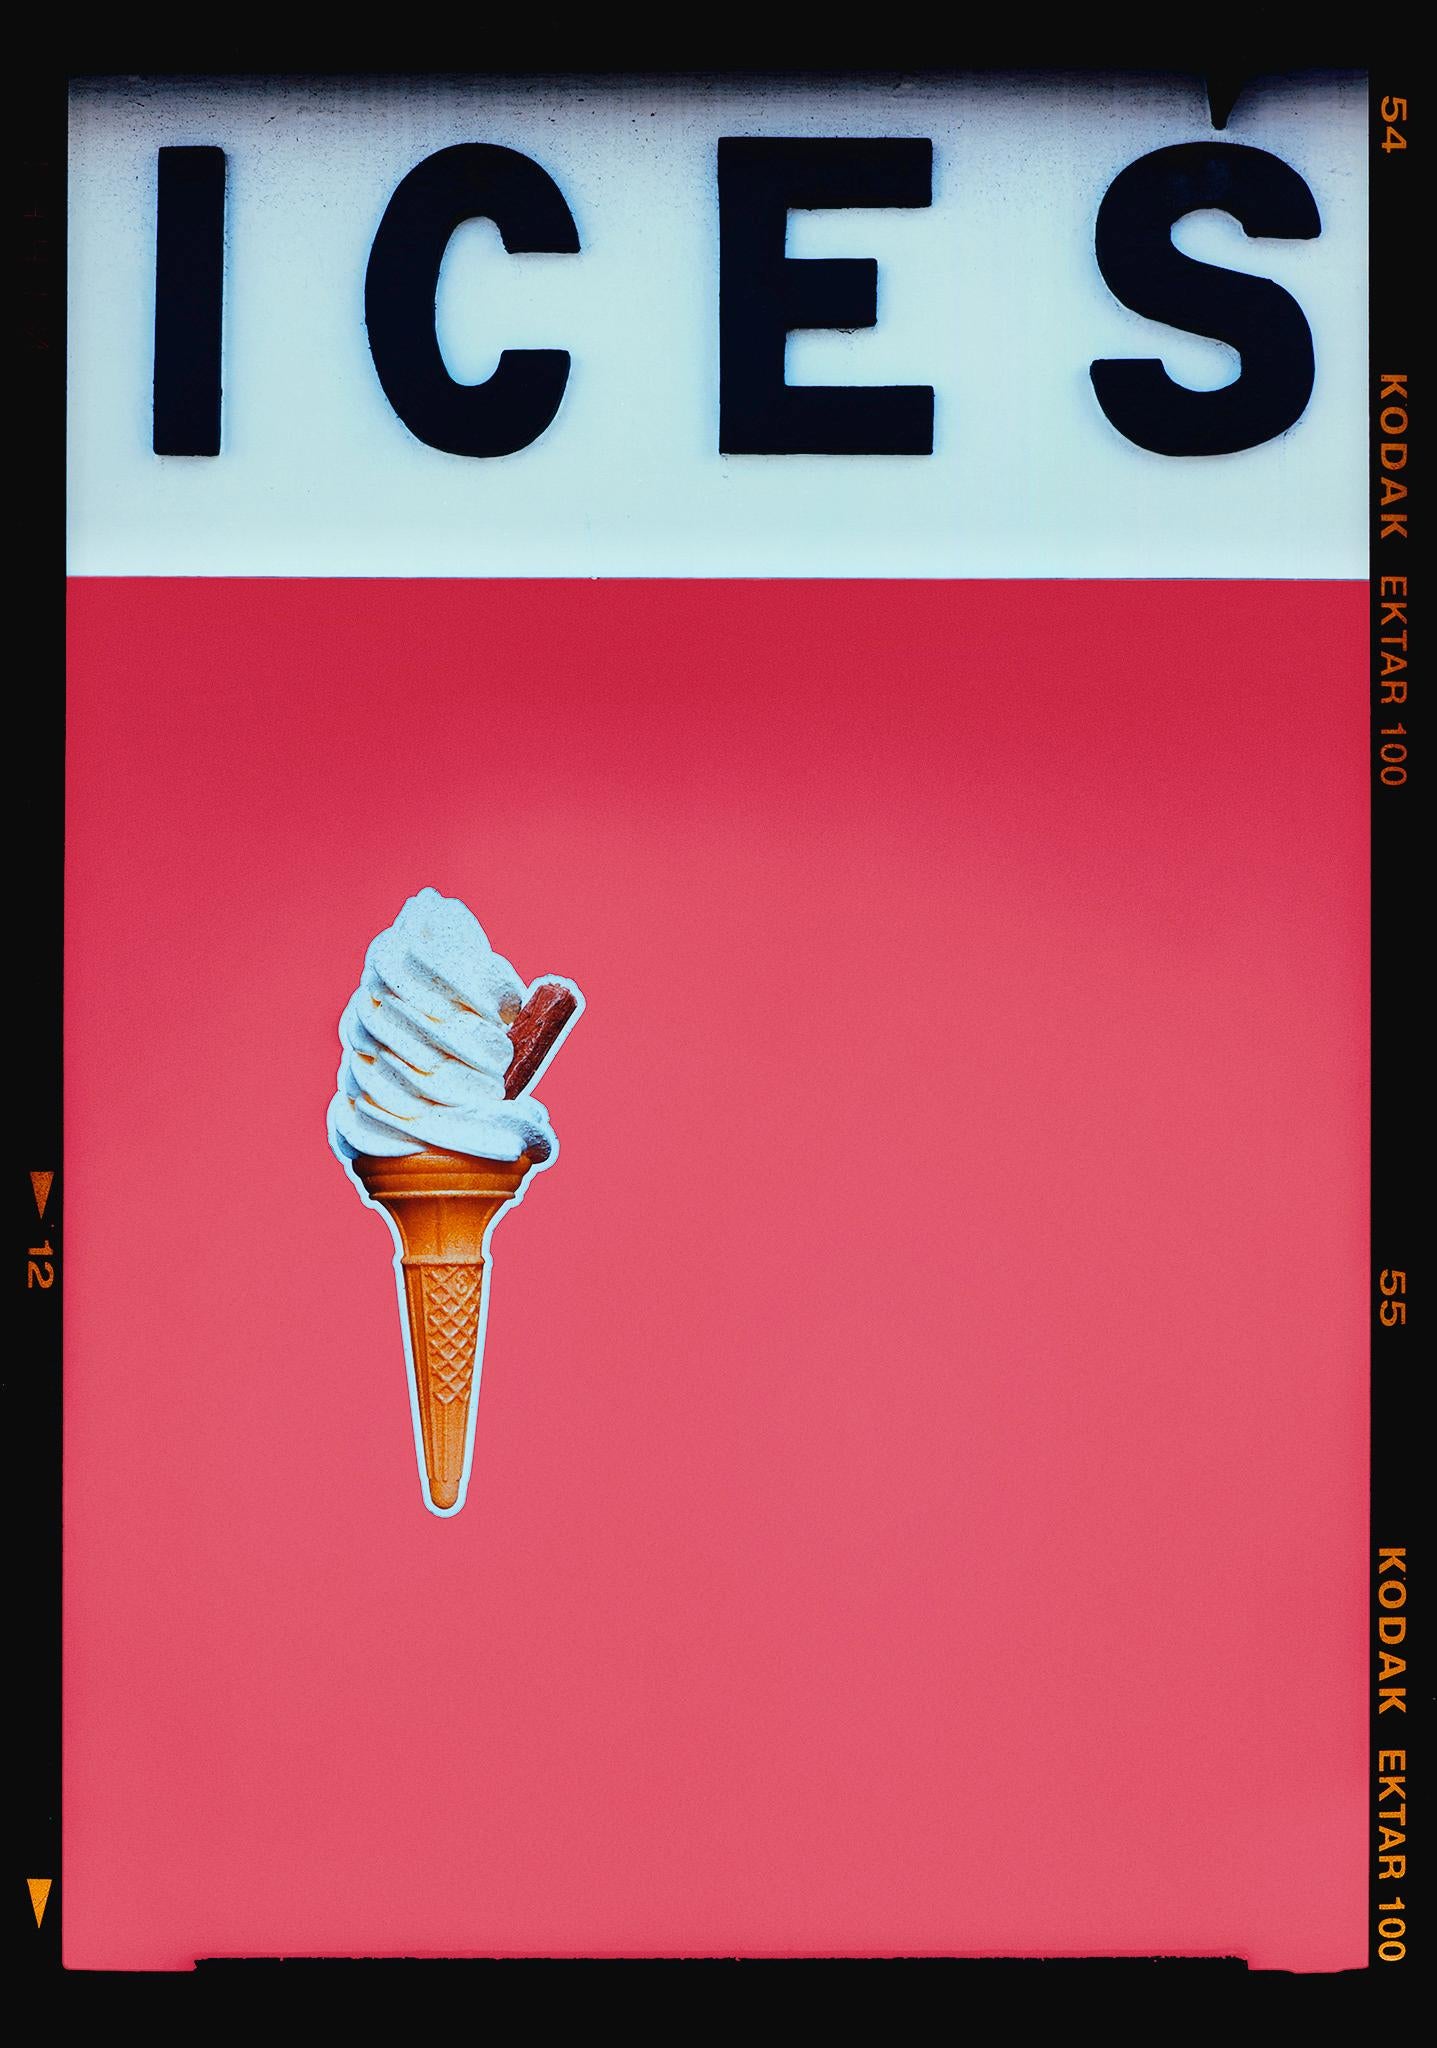 ICES Coral Pink and Baby Blue, bold colour blocking pop art street photography from Richard Heeps series, On-Sea.
Created as an ode to childhood visits to grandparents living on the Sussex coast, the artwork tells the story of the simple joys of the